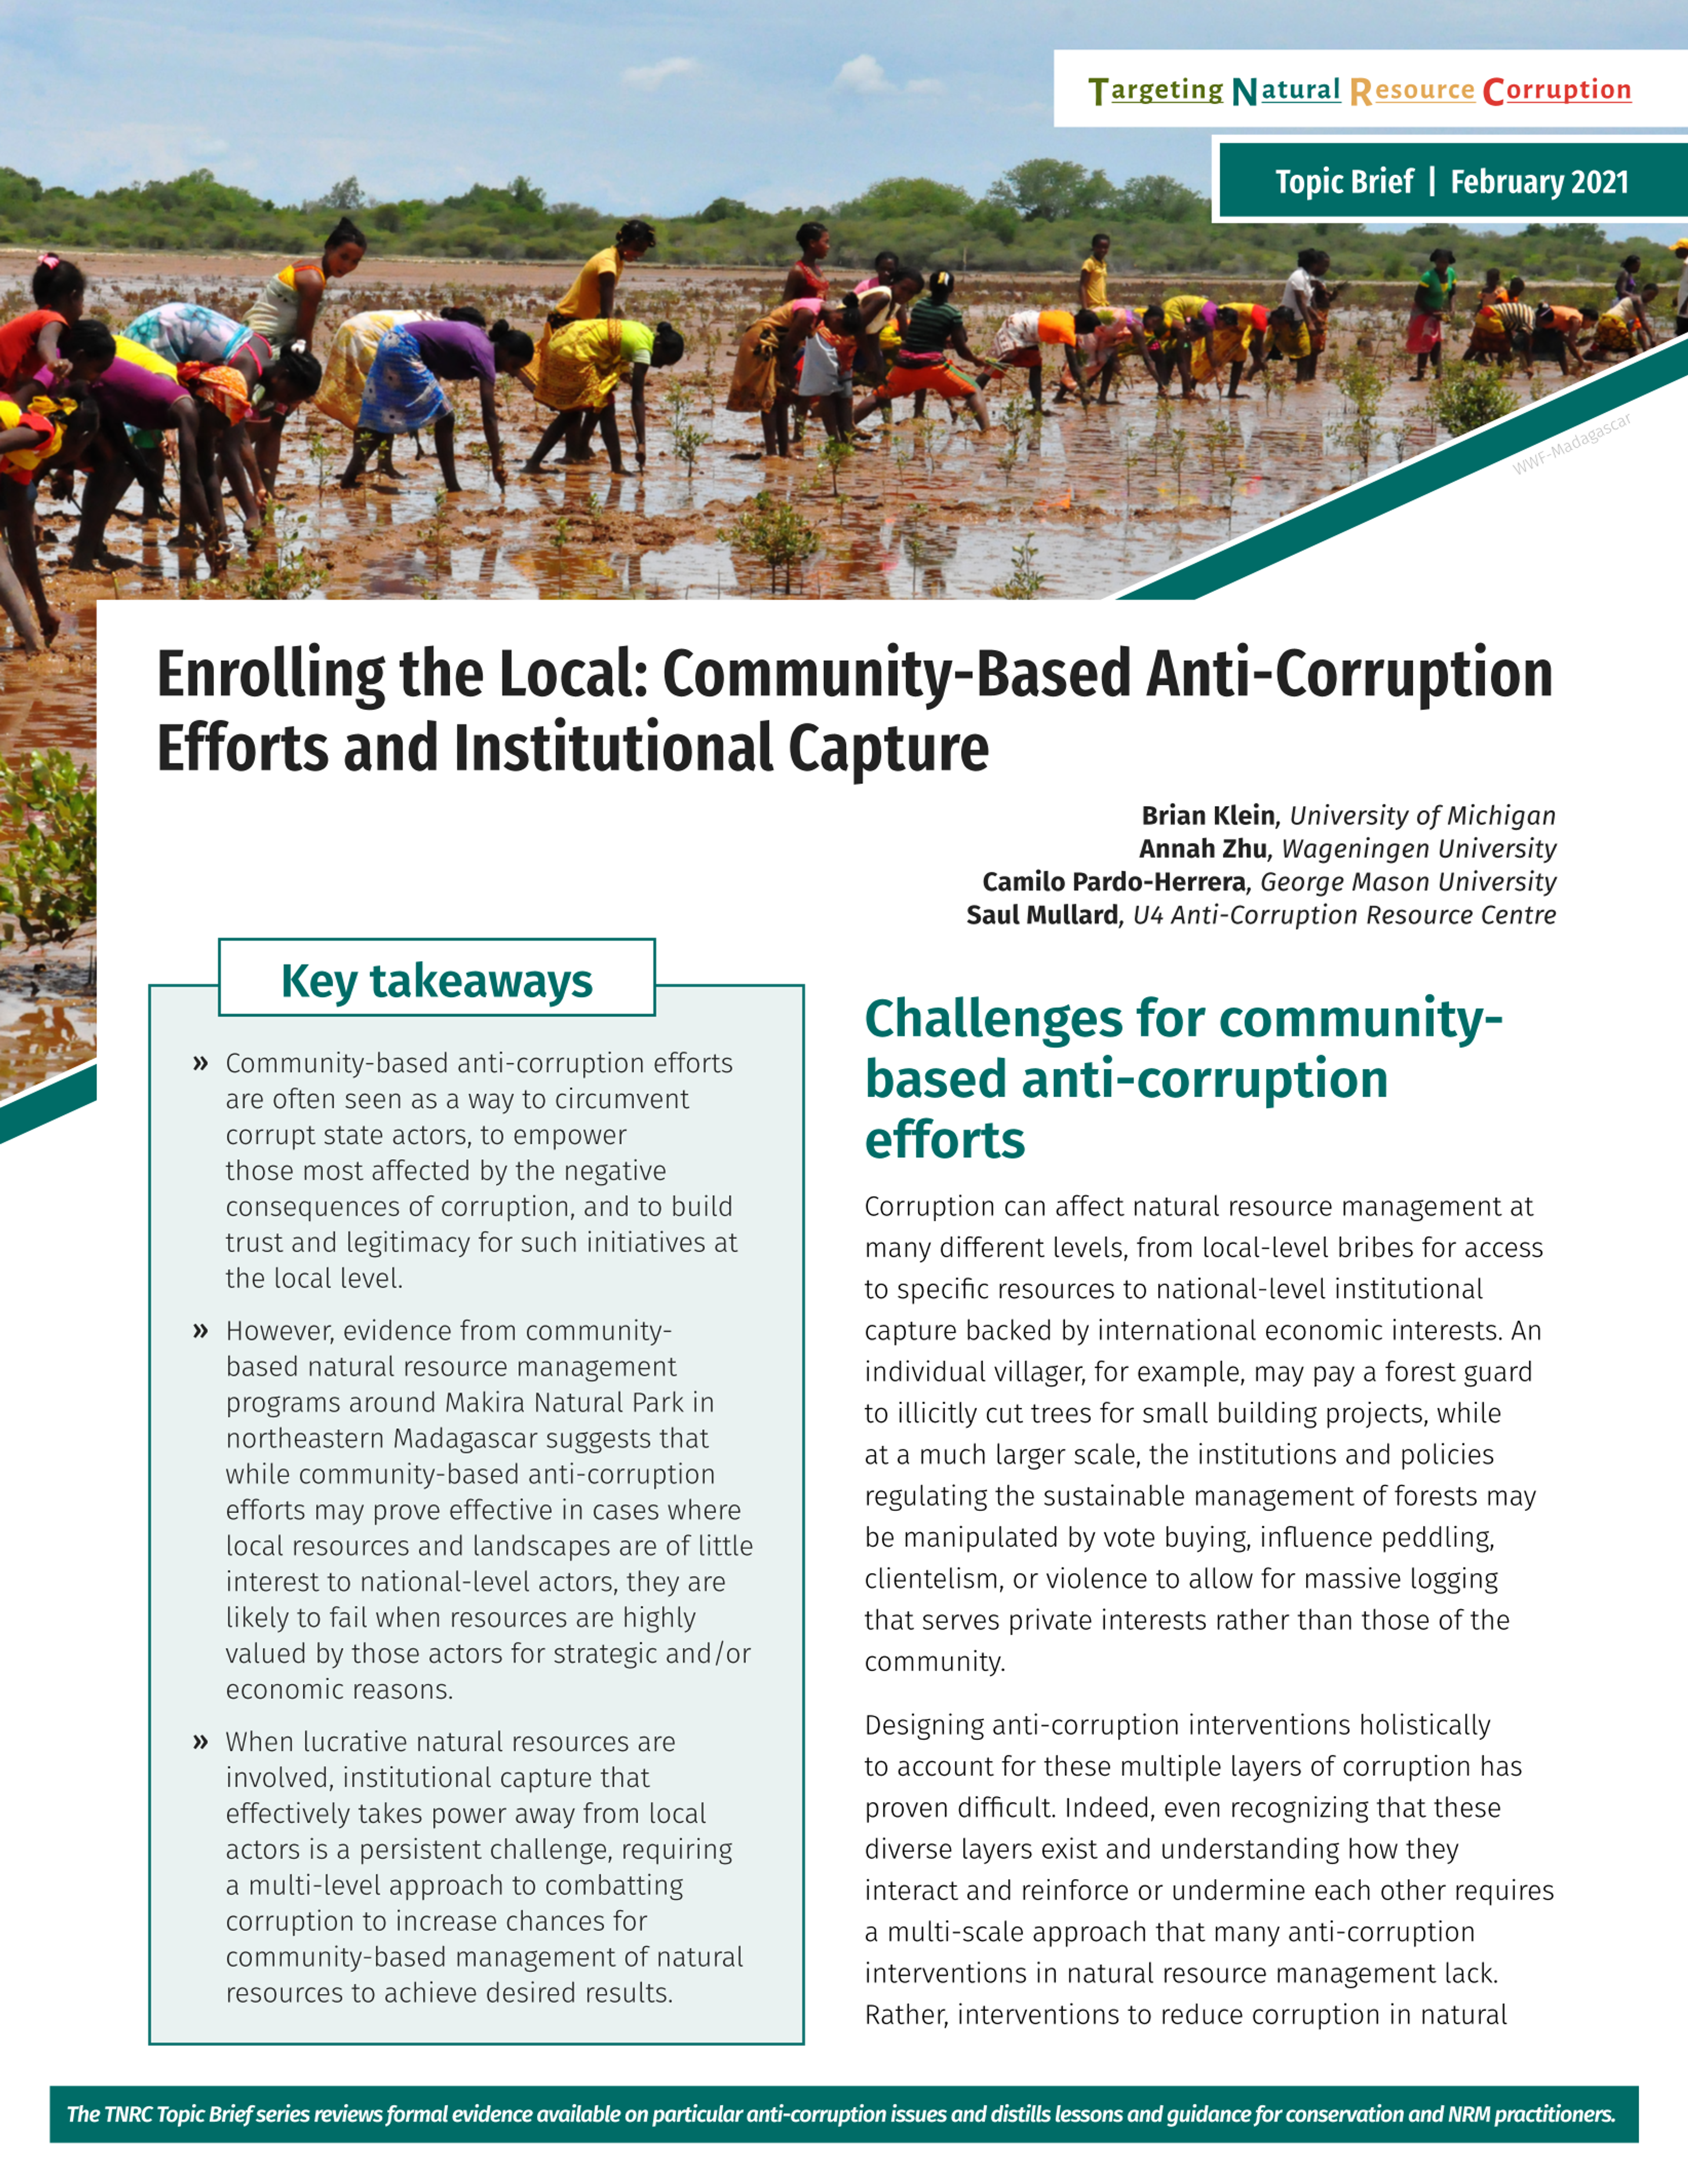 Enrolling the local: Community-based anti-corruption efforts and institutional capture